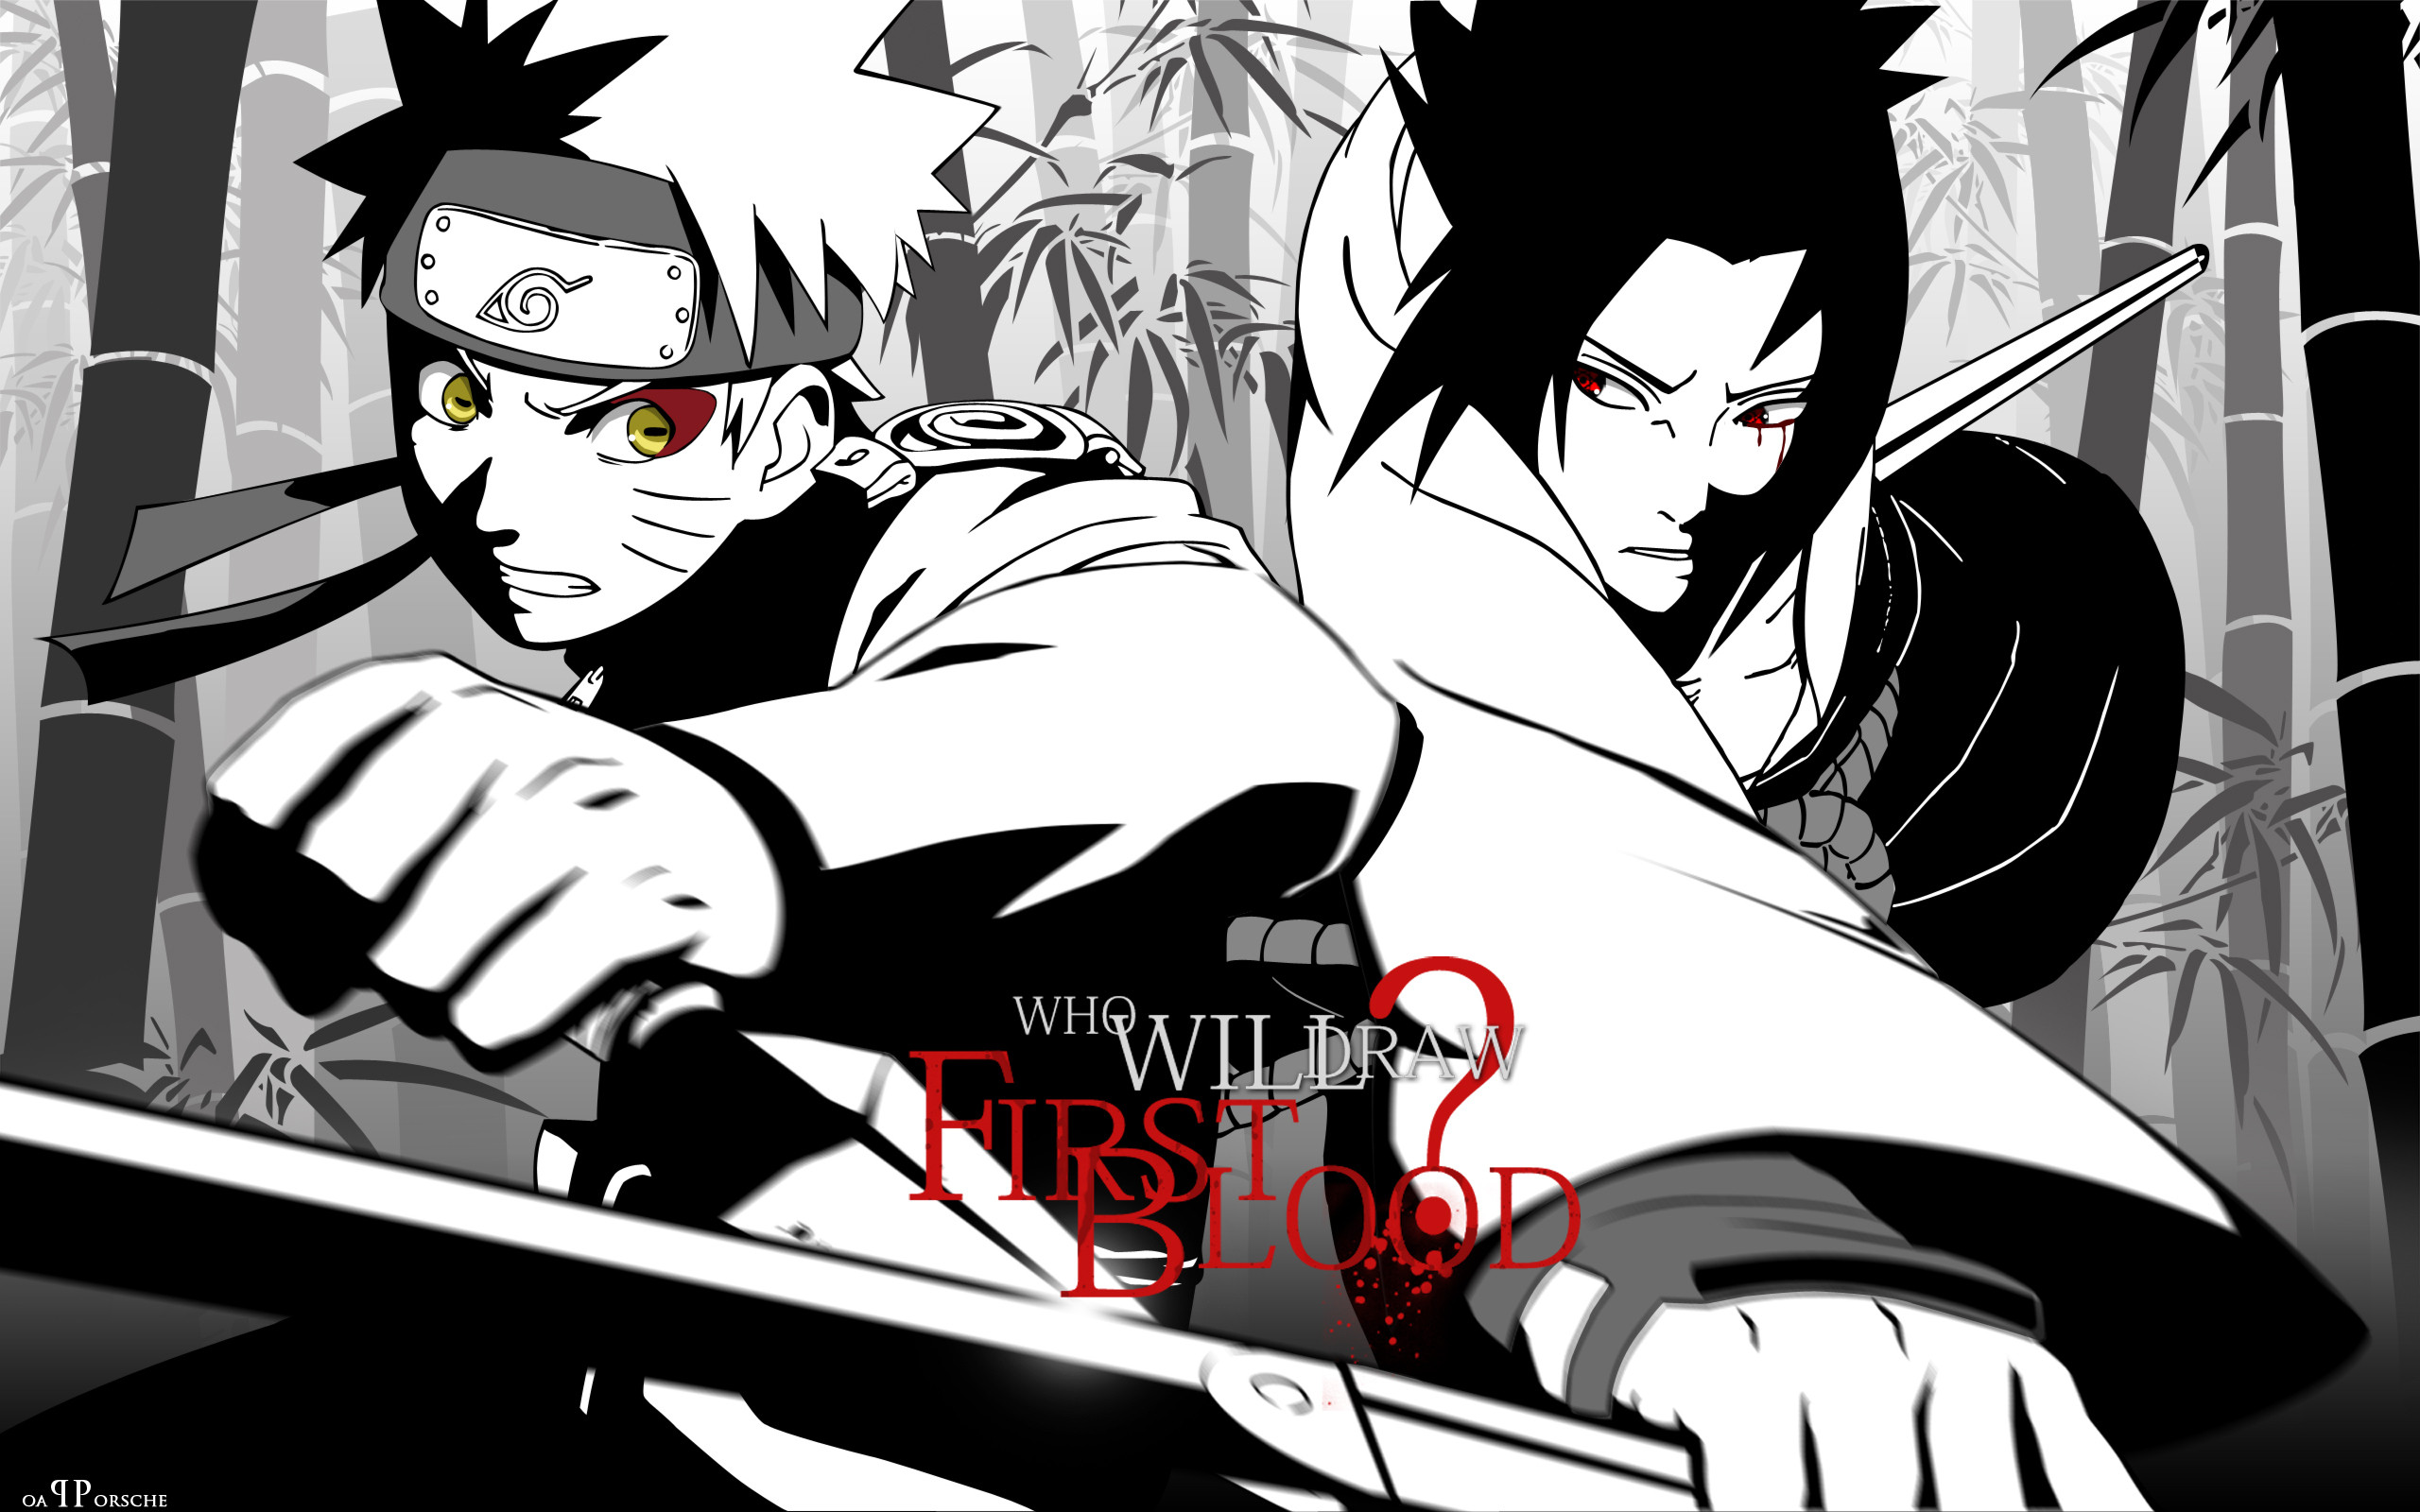 Naruto Shippuden Terbaru Wallpapers Pictures Images